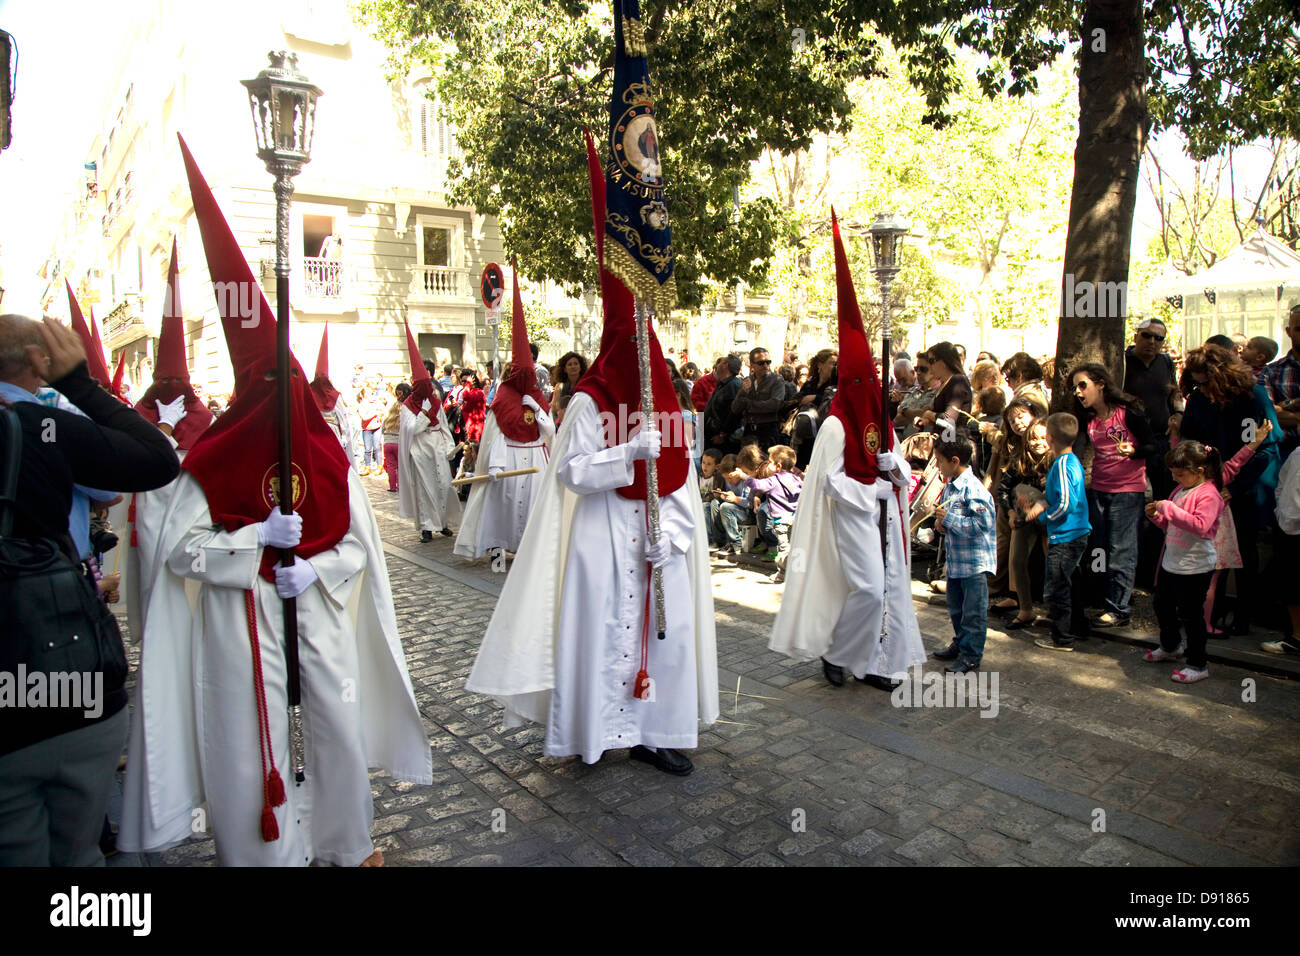 Processions in the streets with traditional costumes for the Catholic Festival of Semana Santa, Cadiz, Andalucia, Spain. Stock Photo